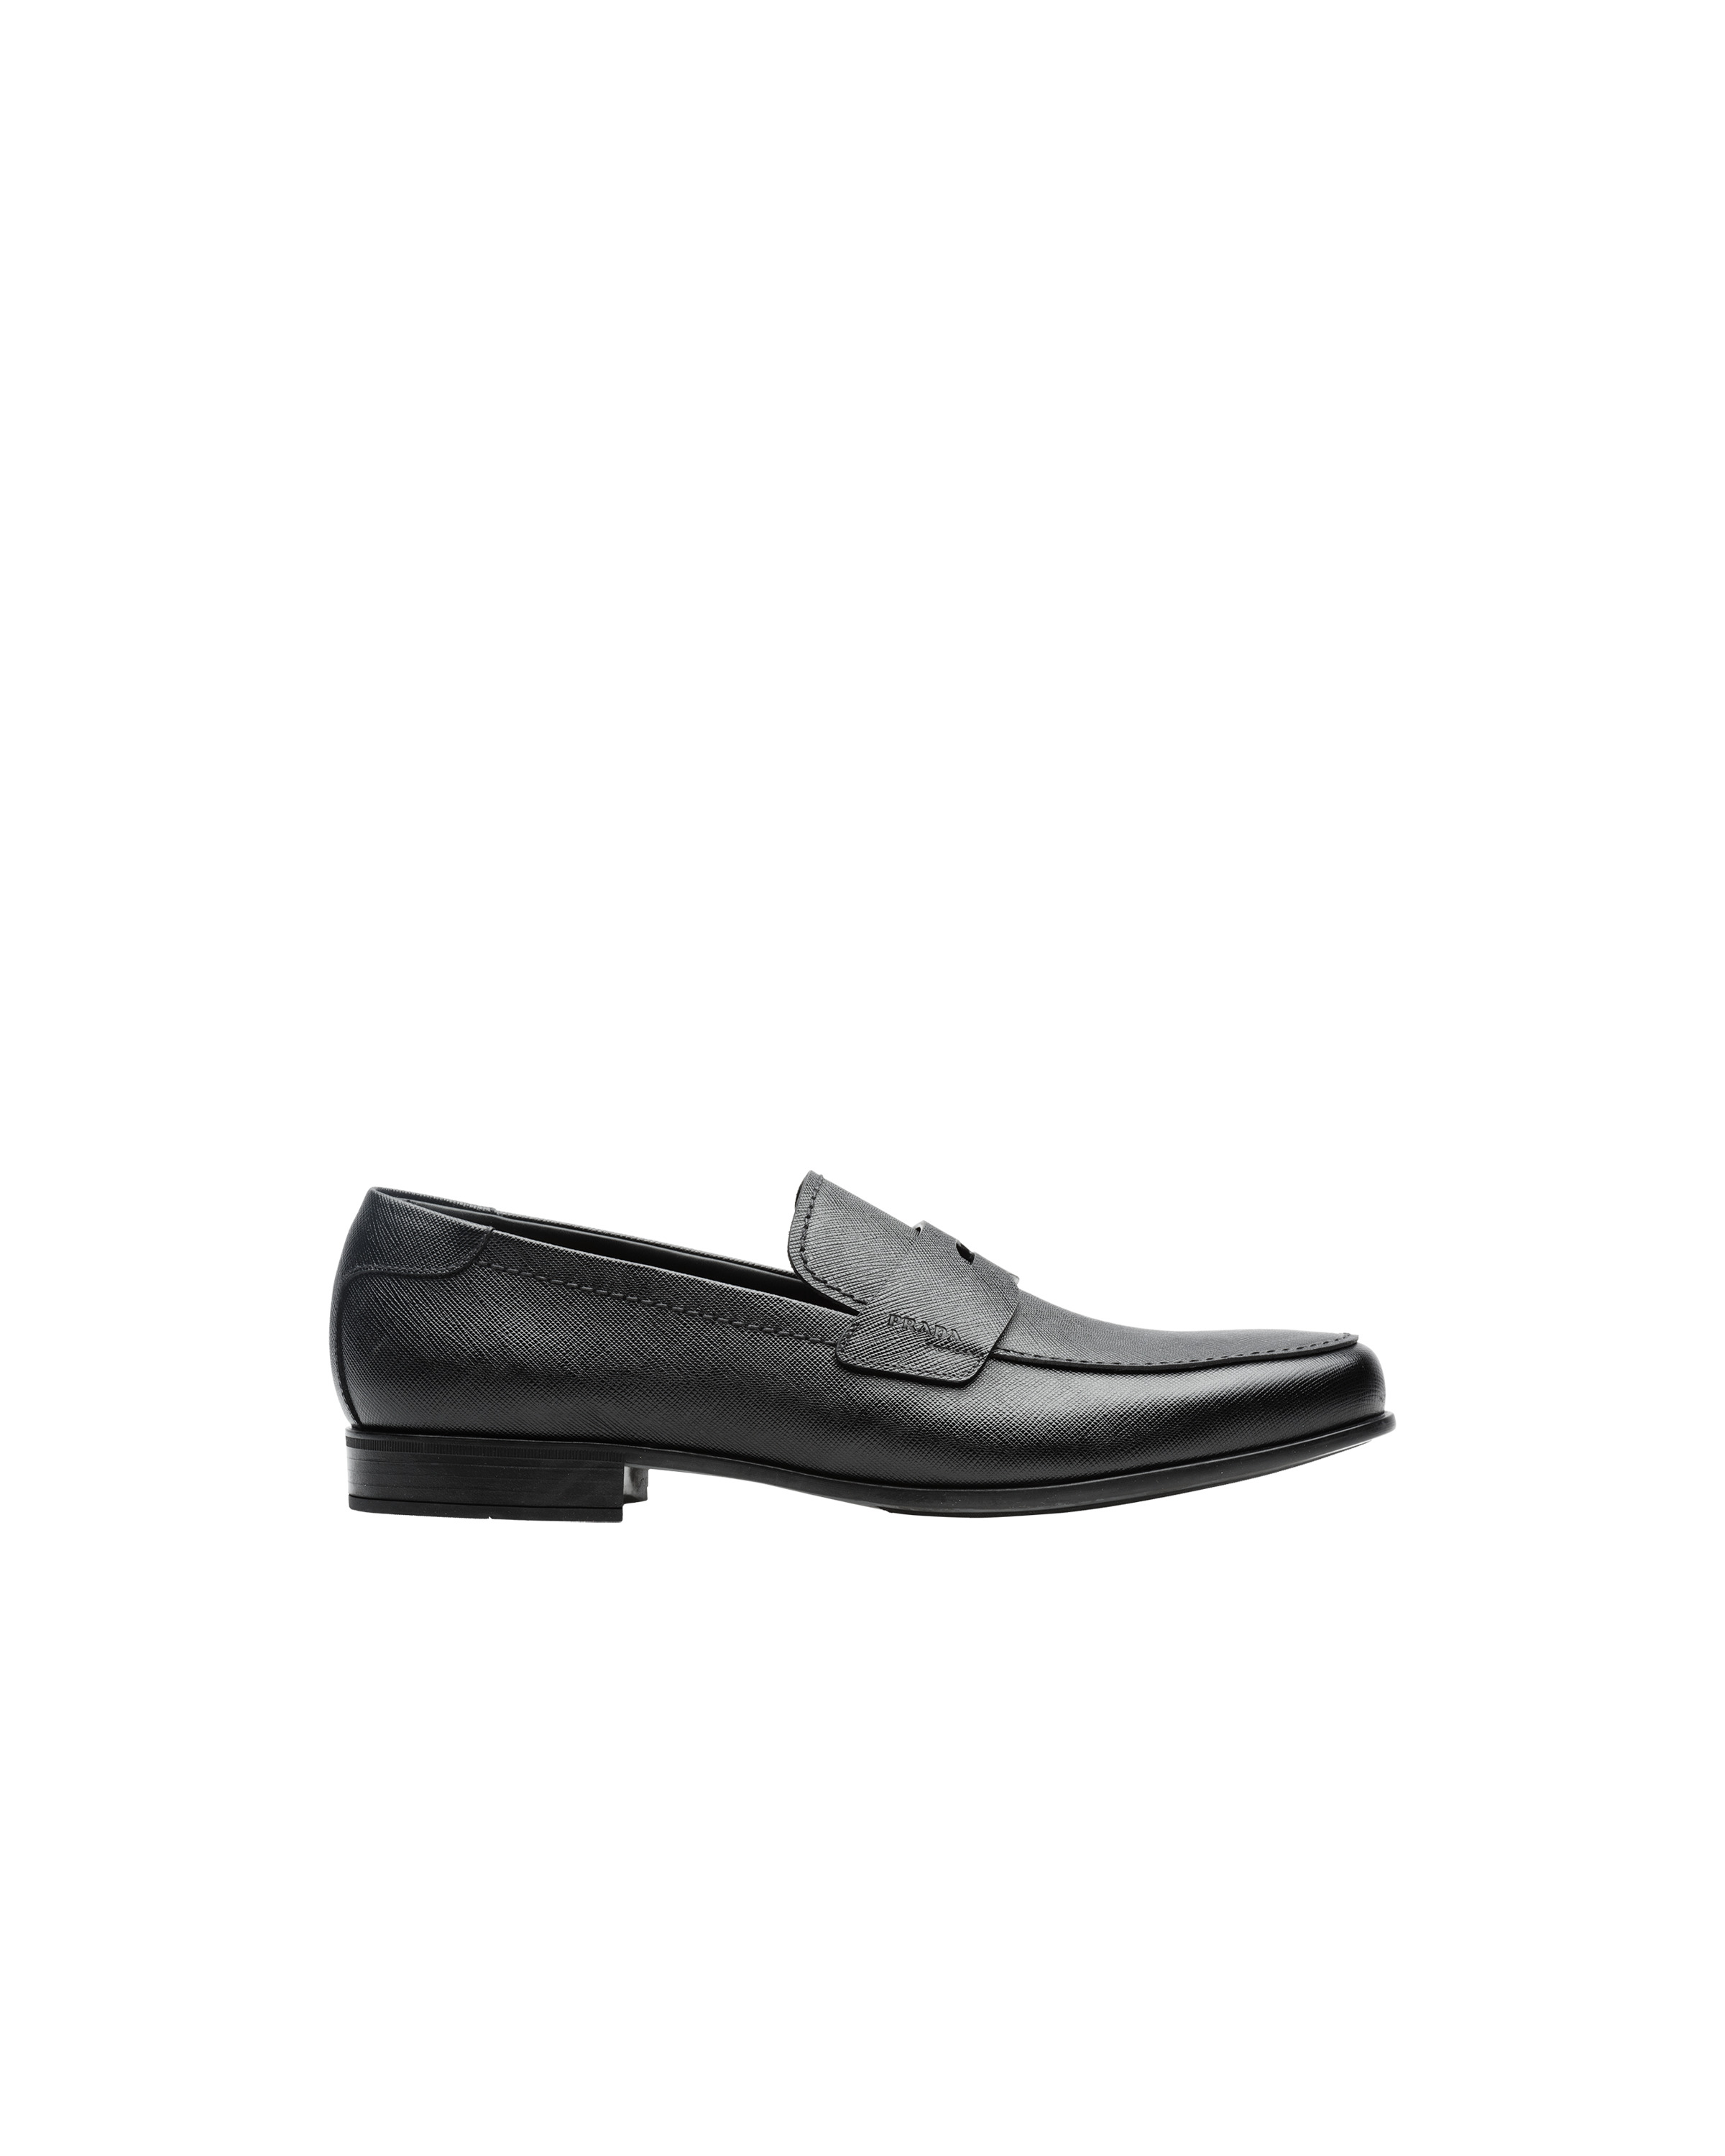 Saffiano leather loafers - 2